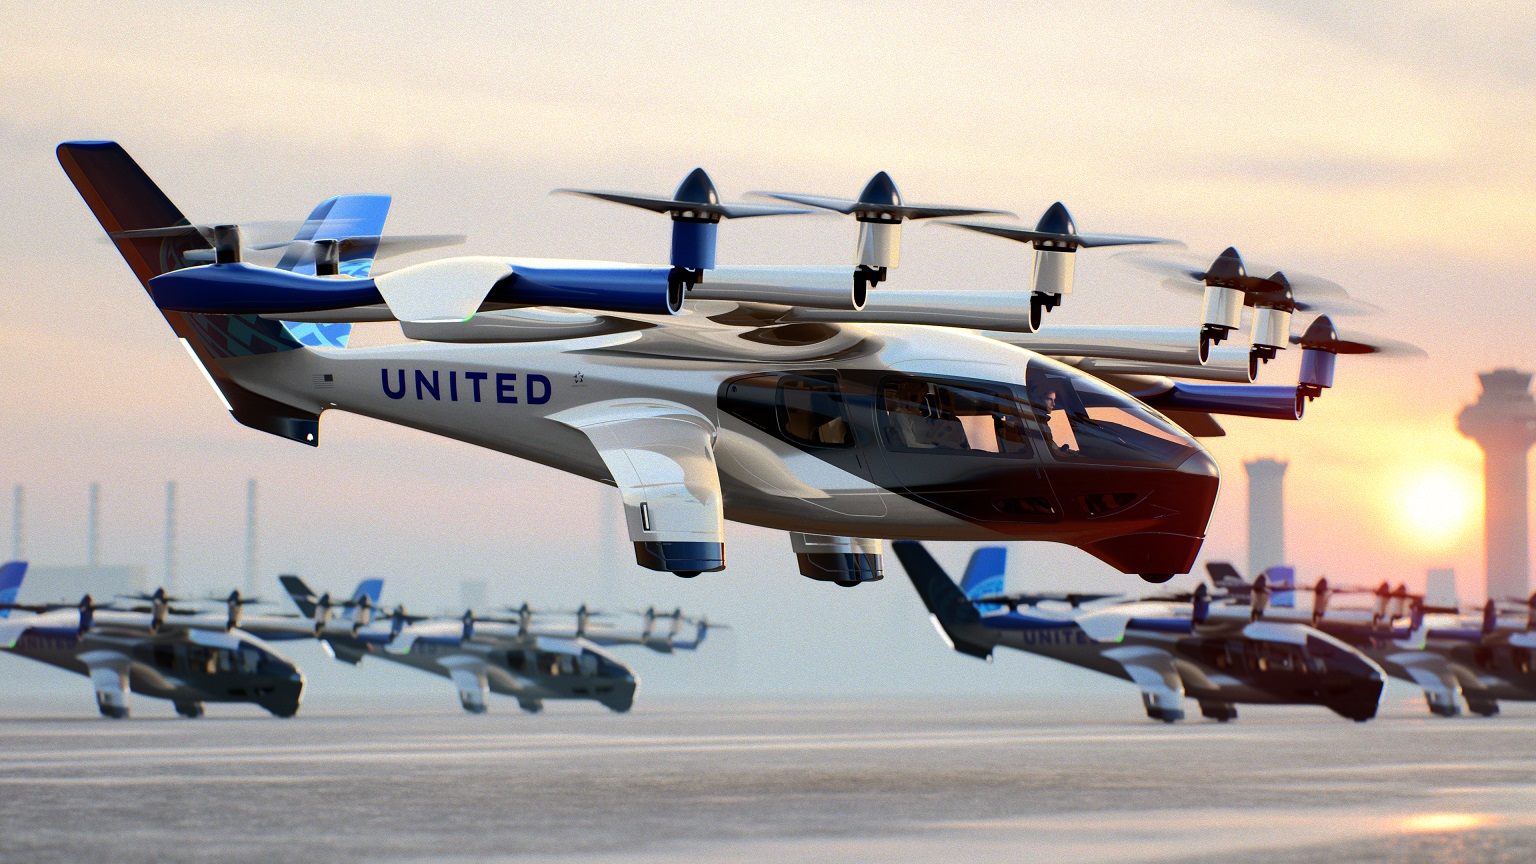 Urban air mobility eVTOL Chicago (image: Business Wire)